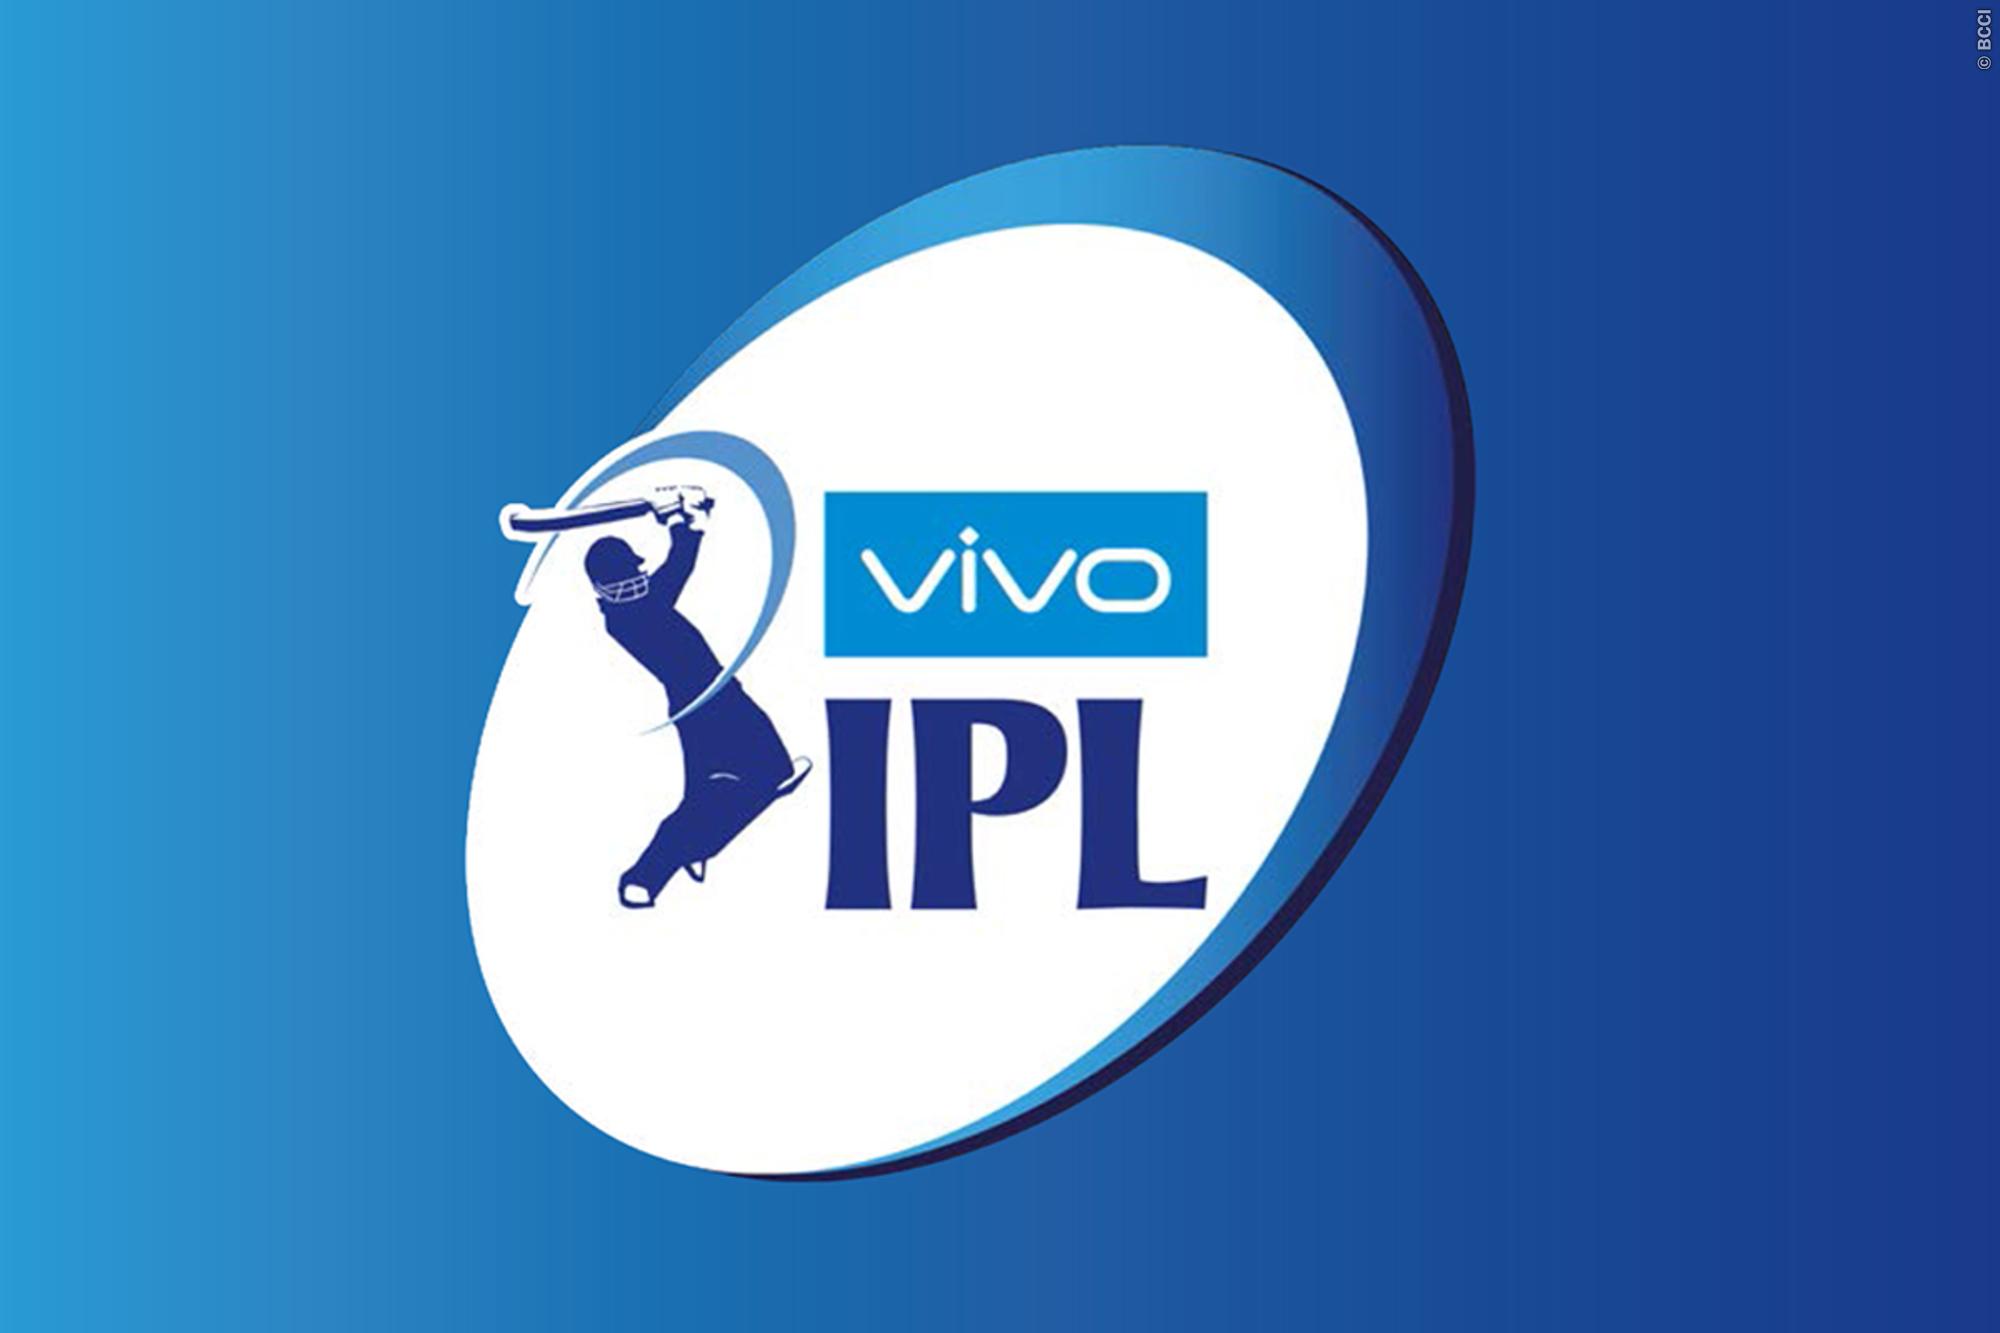 The IPL logo featuring title sponsors VIVO- a Chinese mobile phone company